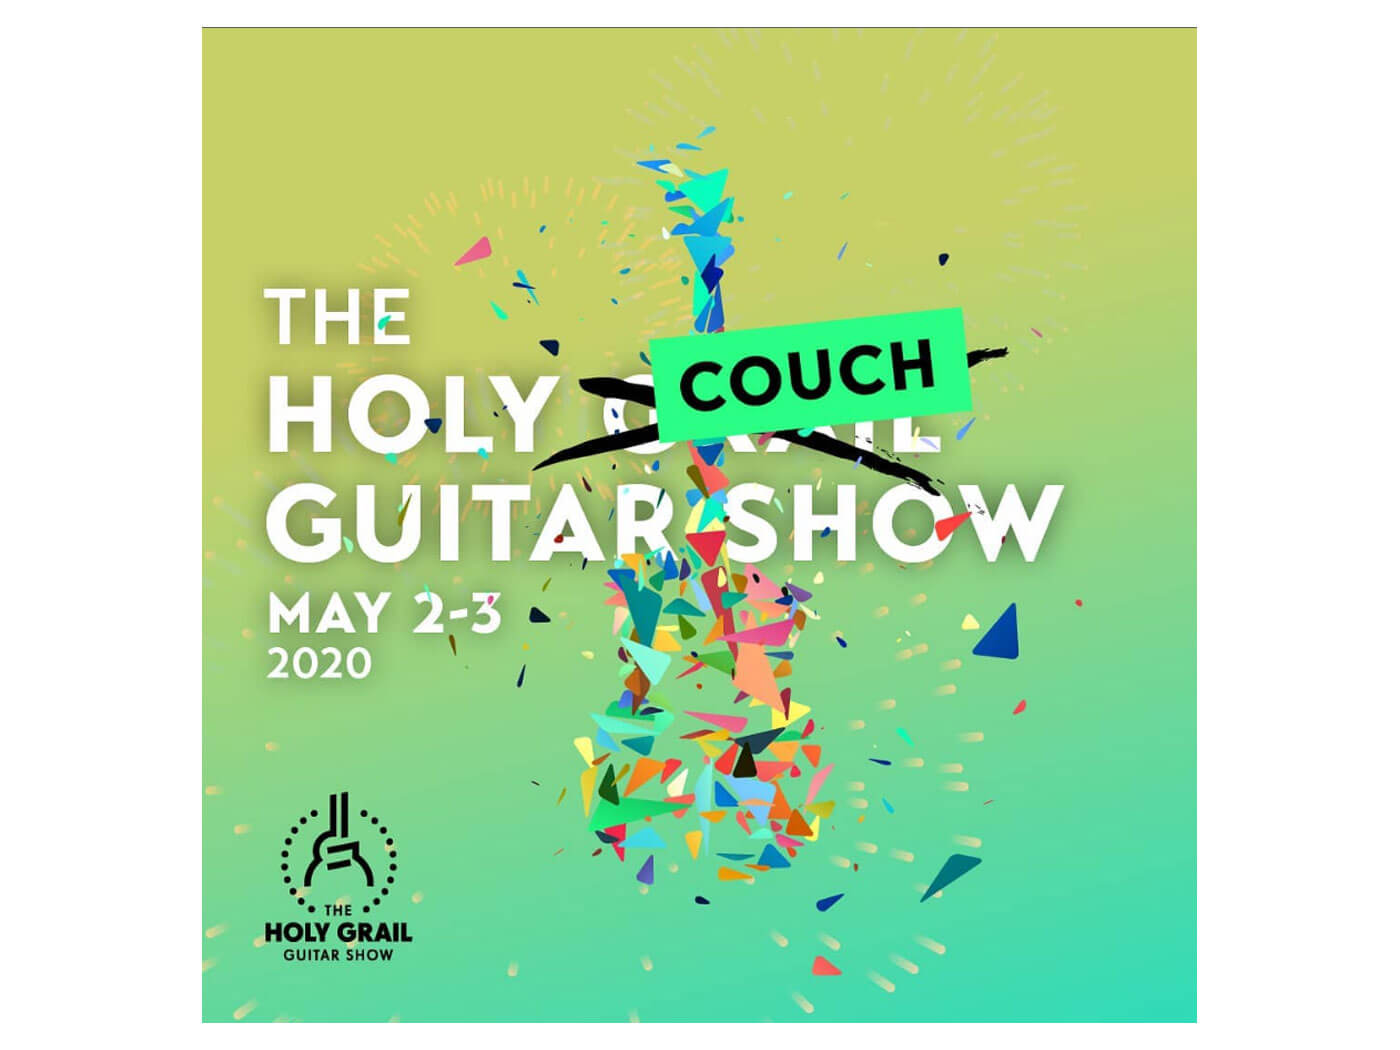 The Holy Couch Guitar Show